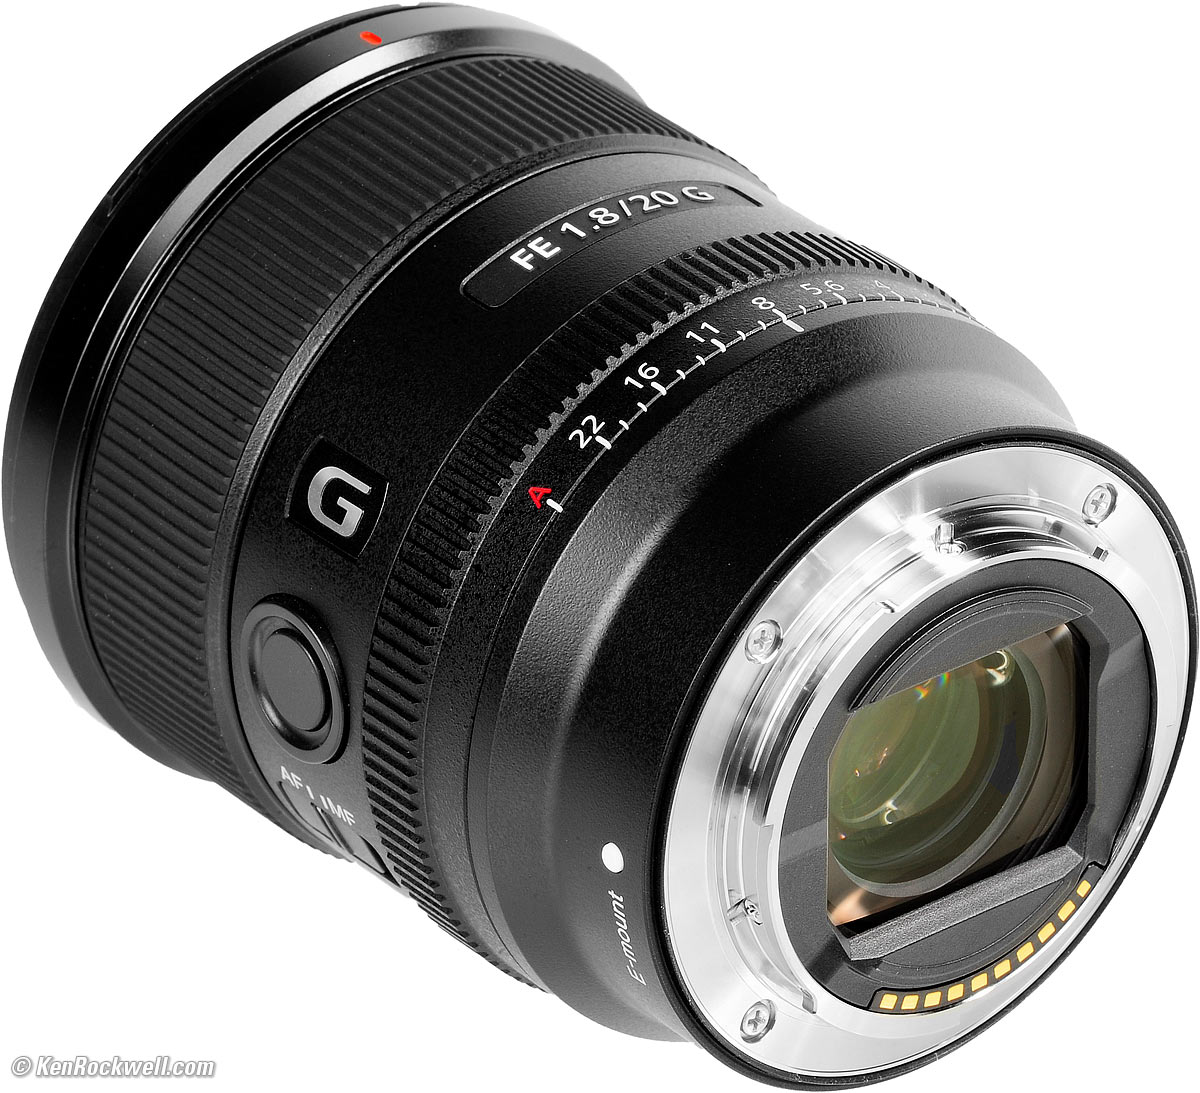 Sony FE 20mm f/1.8 G Review